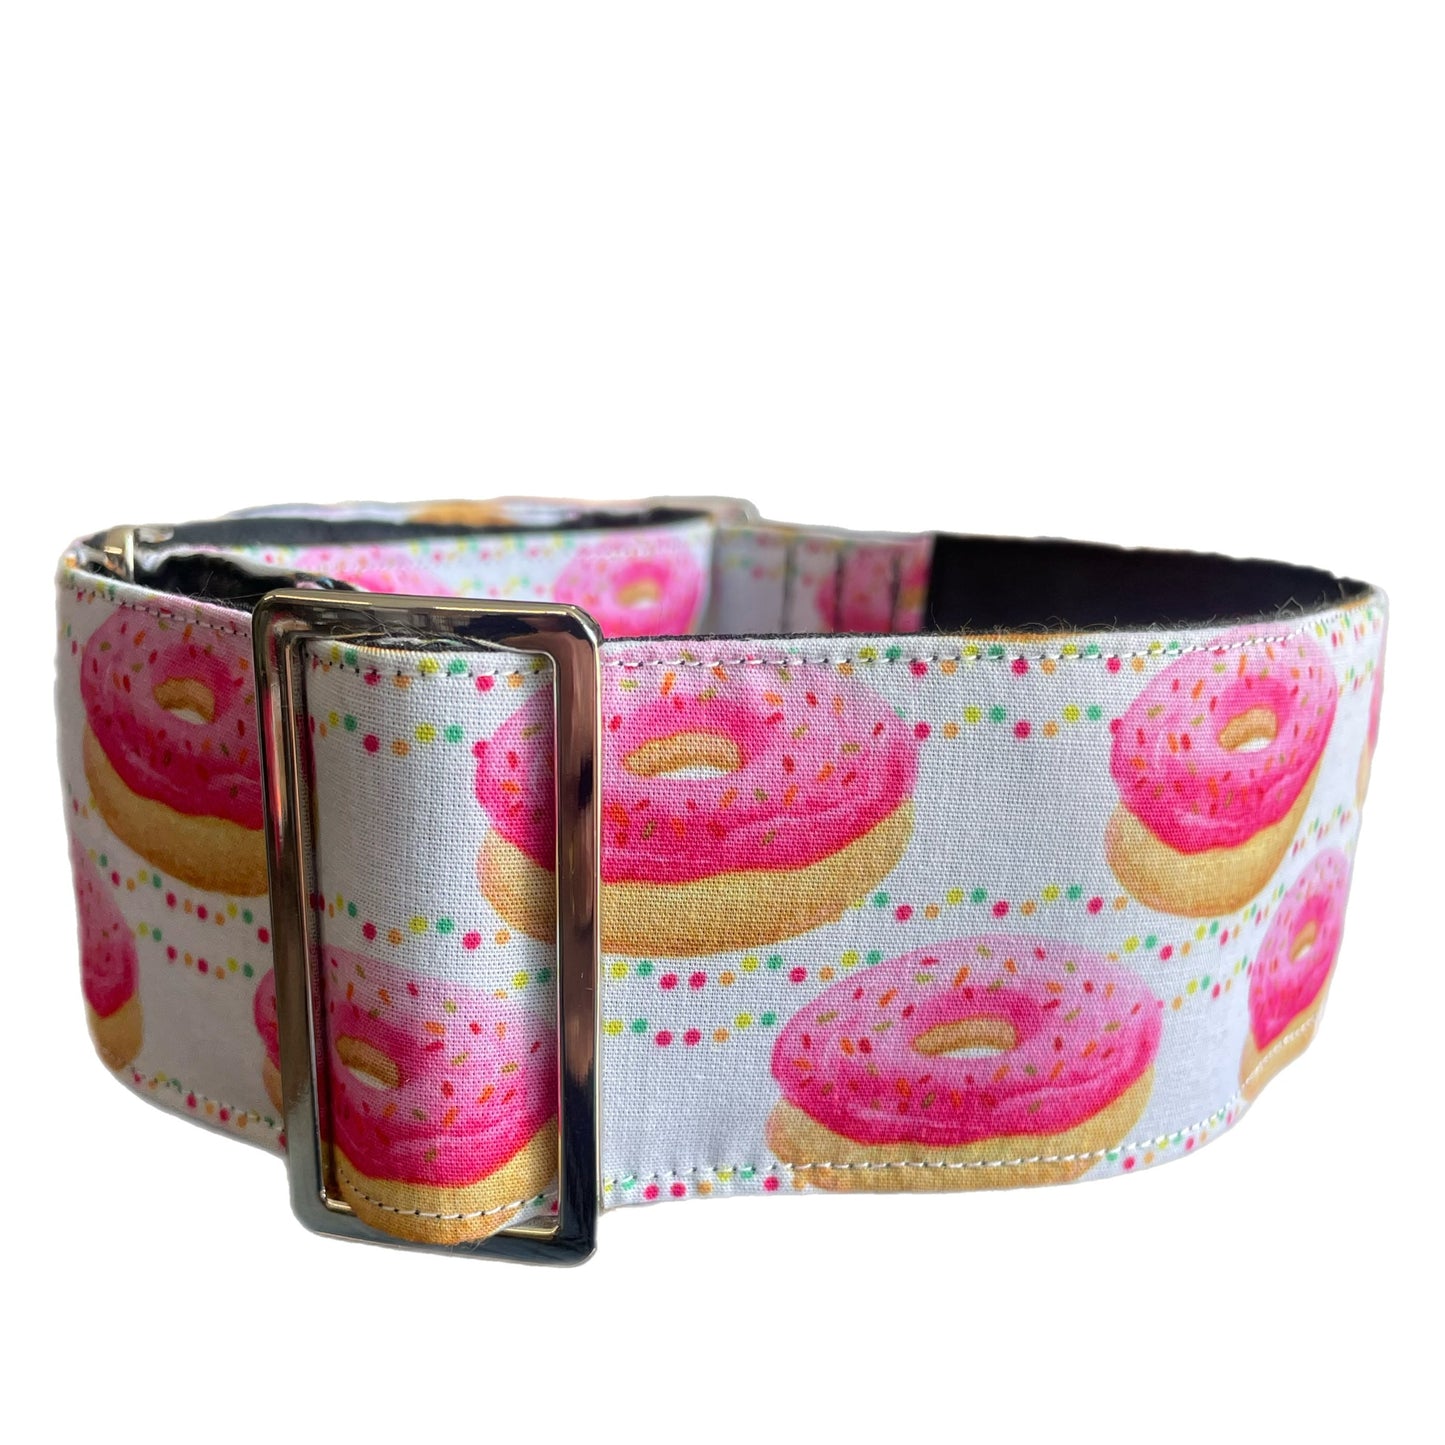 Delicious Donuts Martingale collar greyhound wide super soft cotton fabric